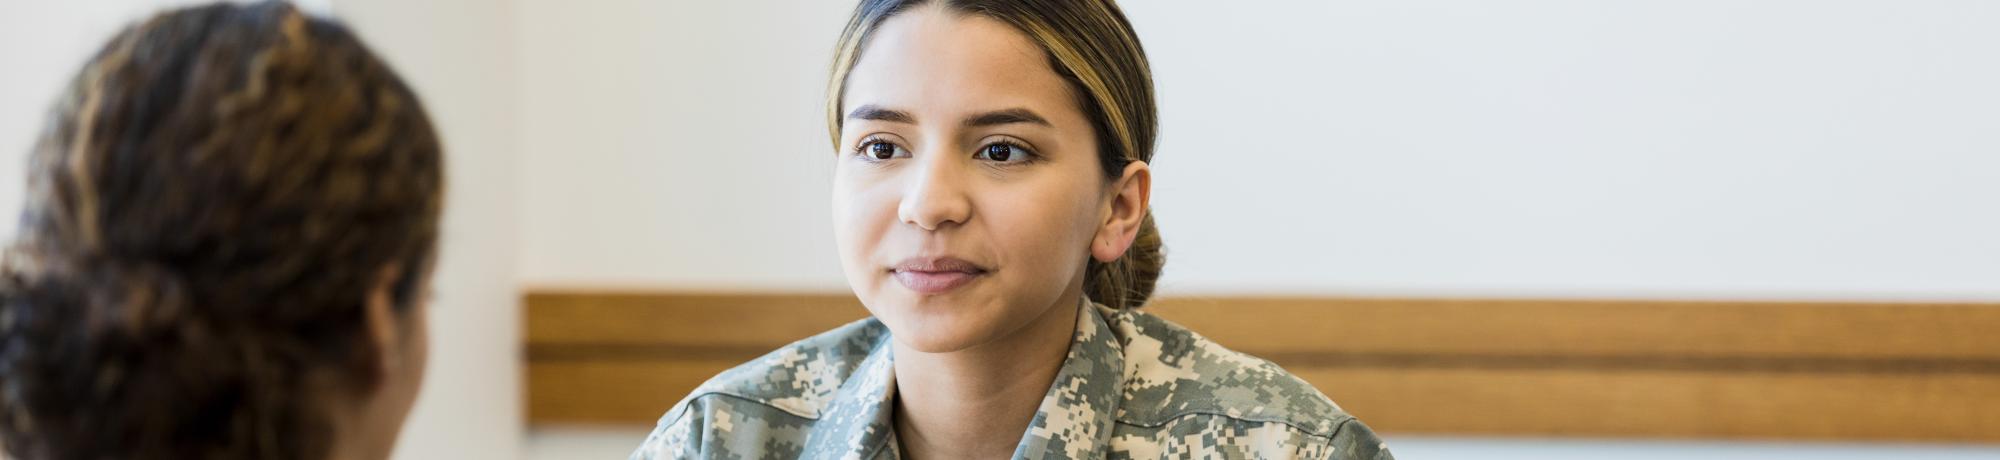 A female military veteran wearing fatigues sits across a table from a woman in civilian clothes